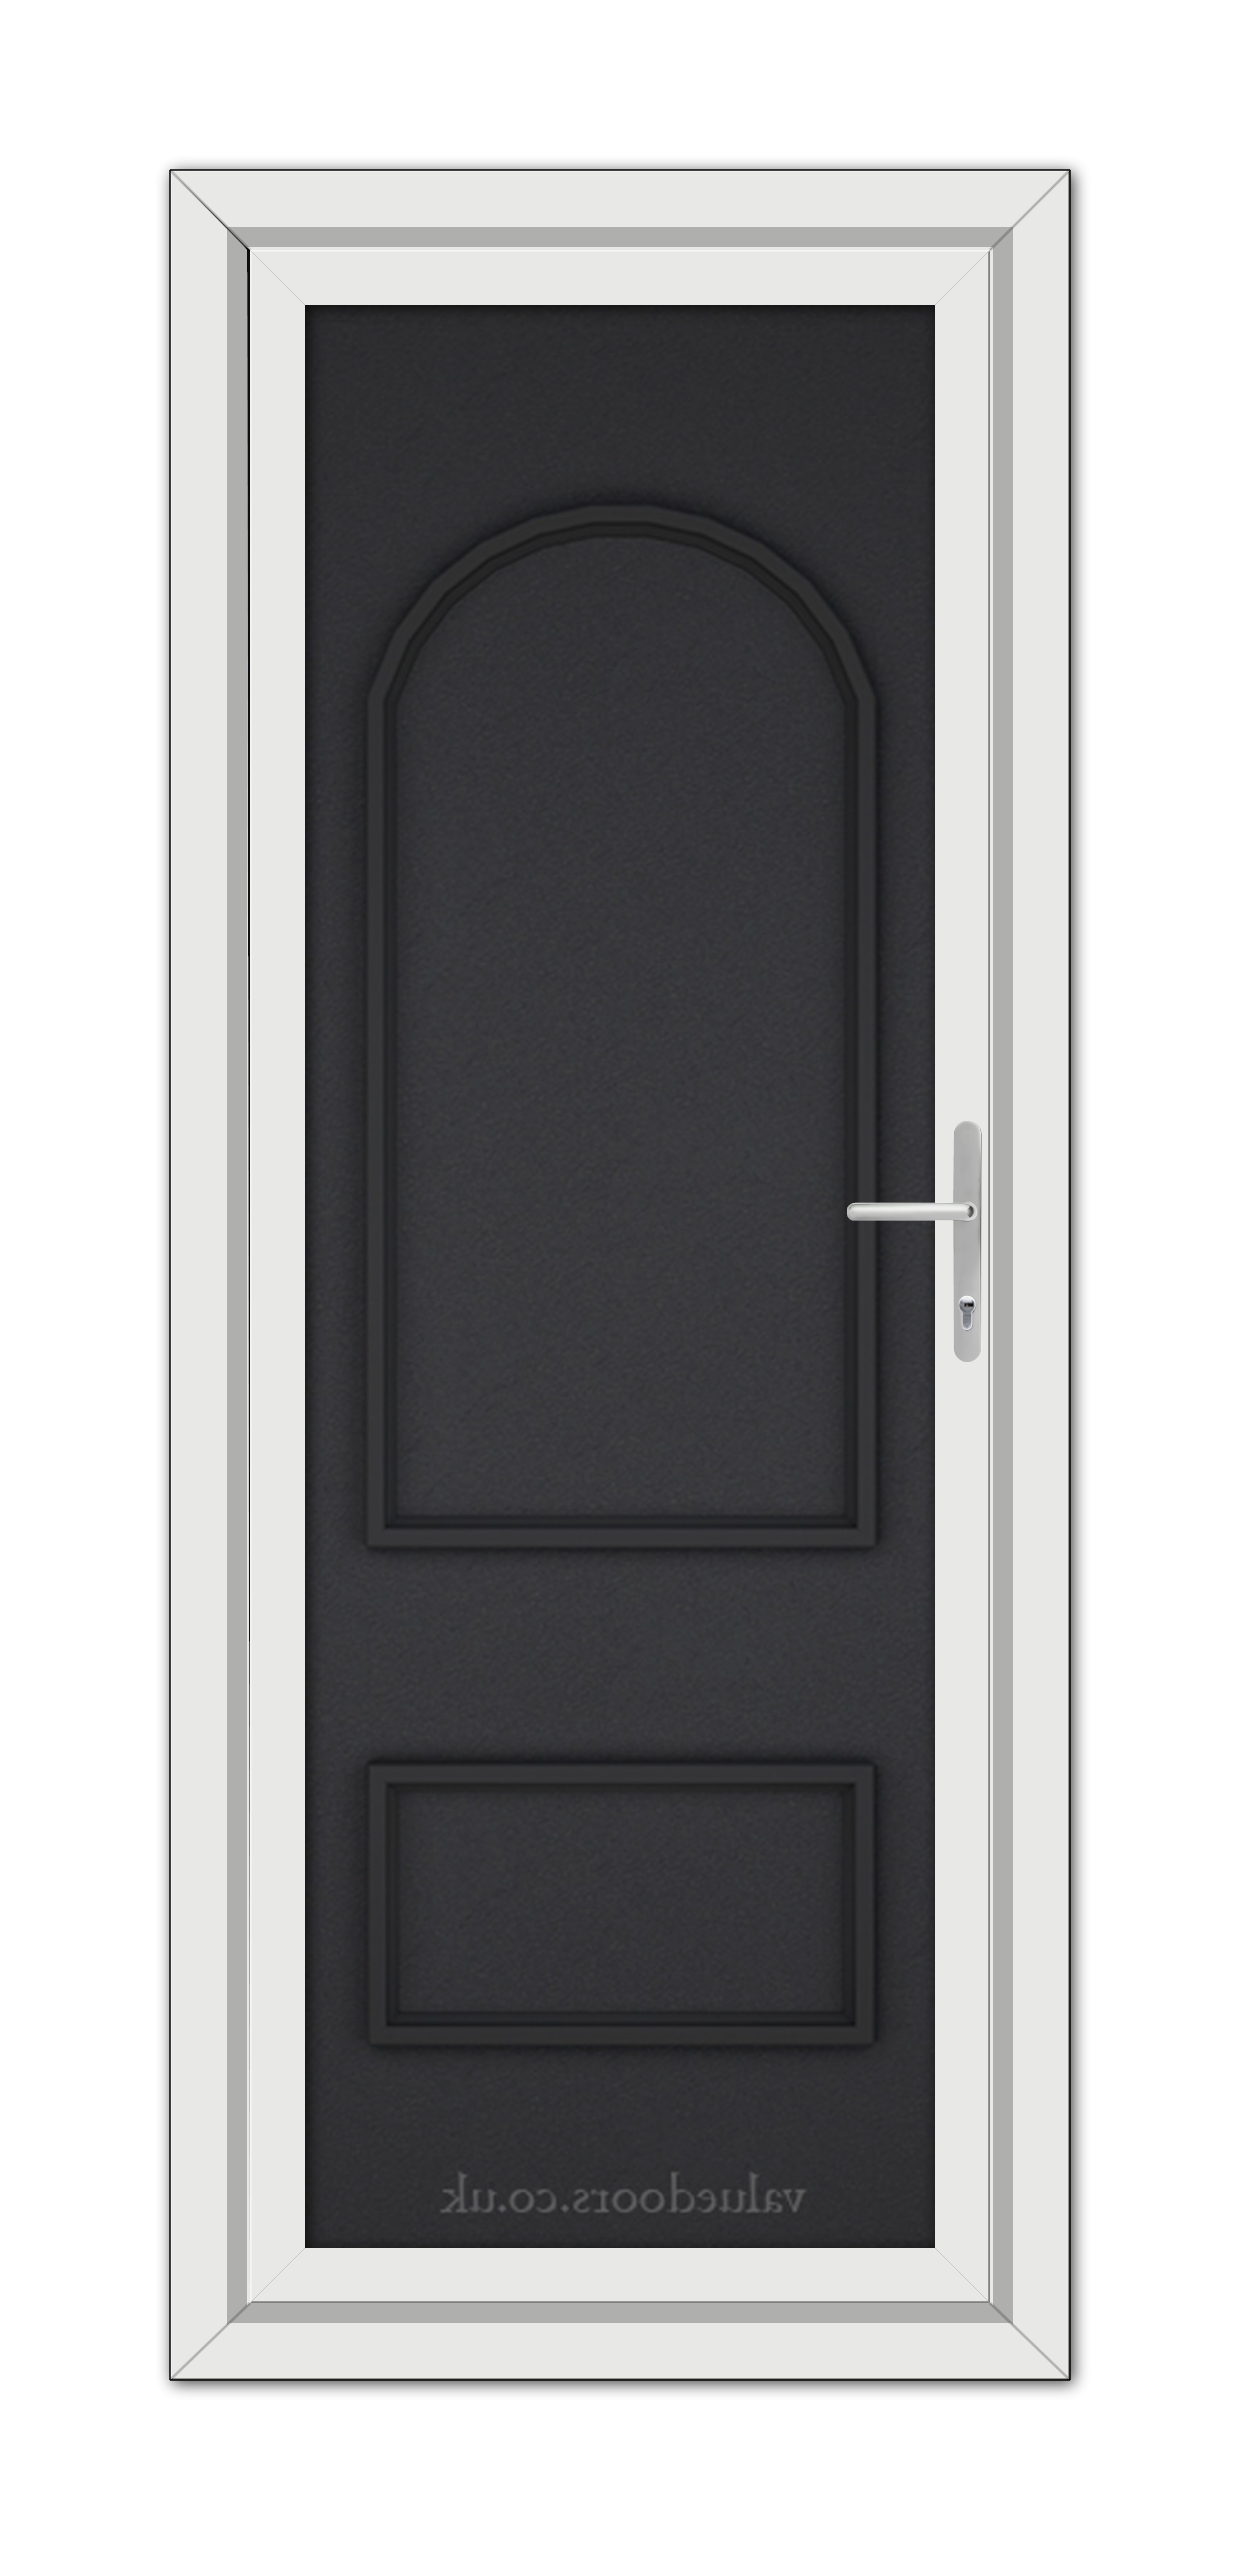 A modern Black Brown Rockingham Solid uPVC door with a silver handle, set within a white door frame, viewed from the front.